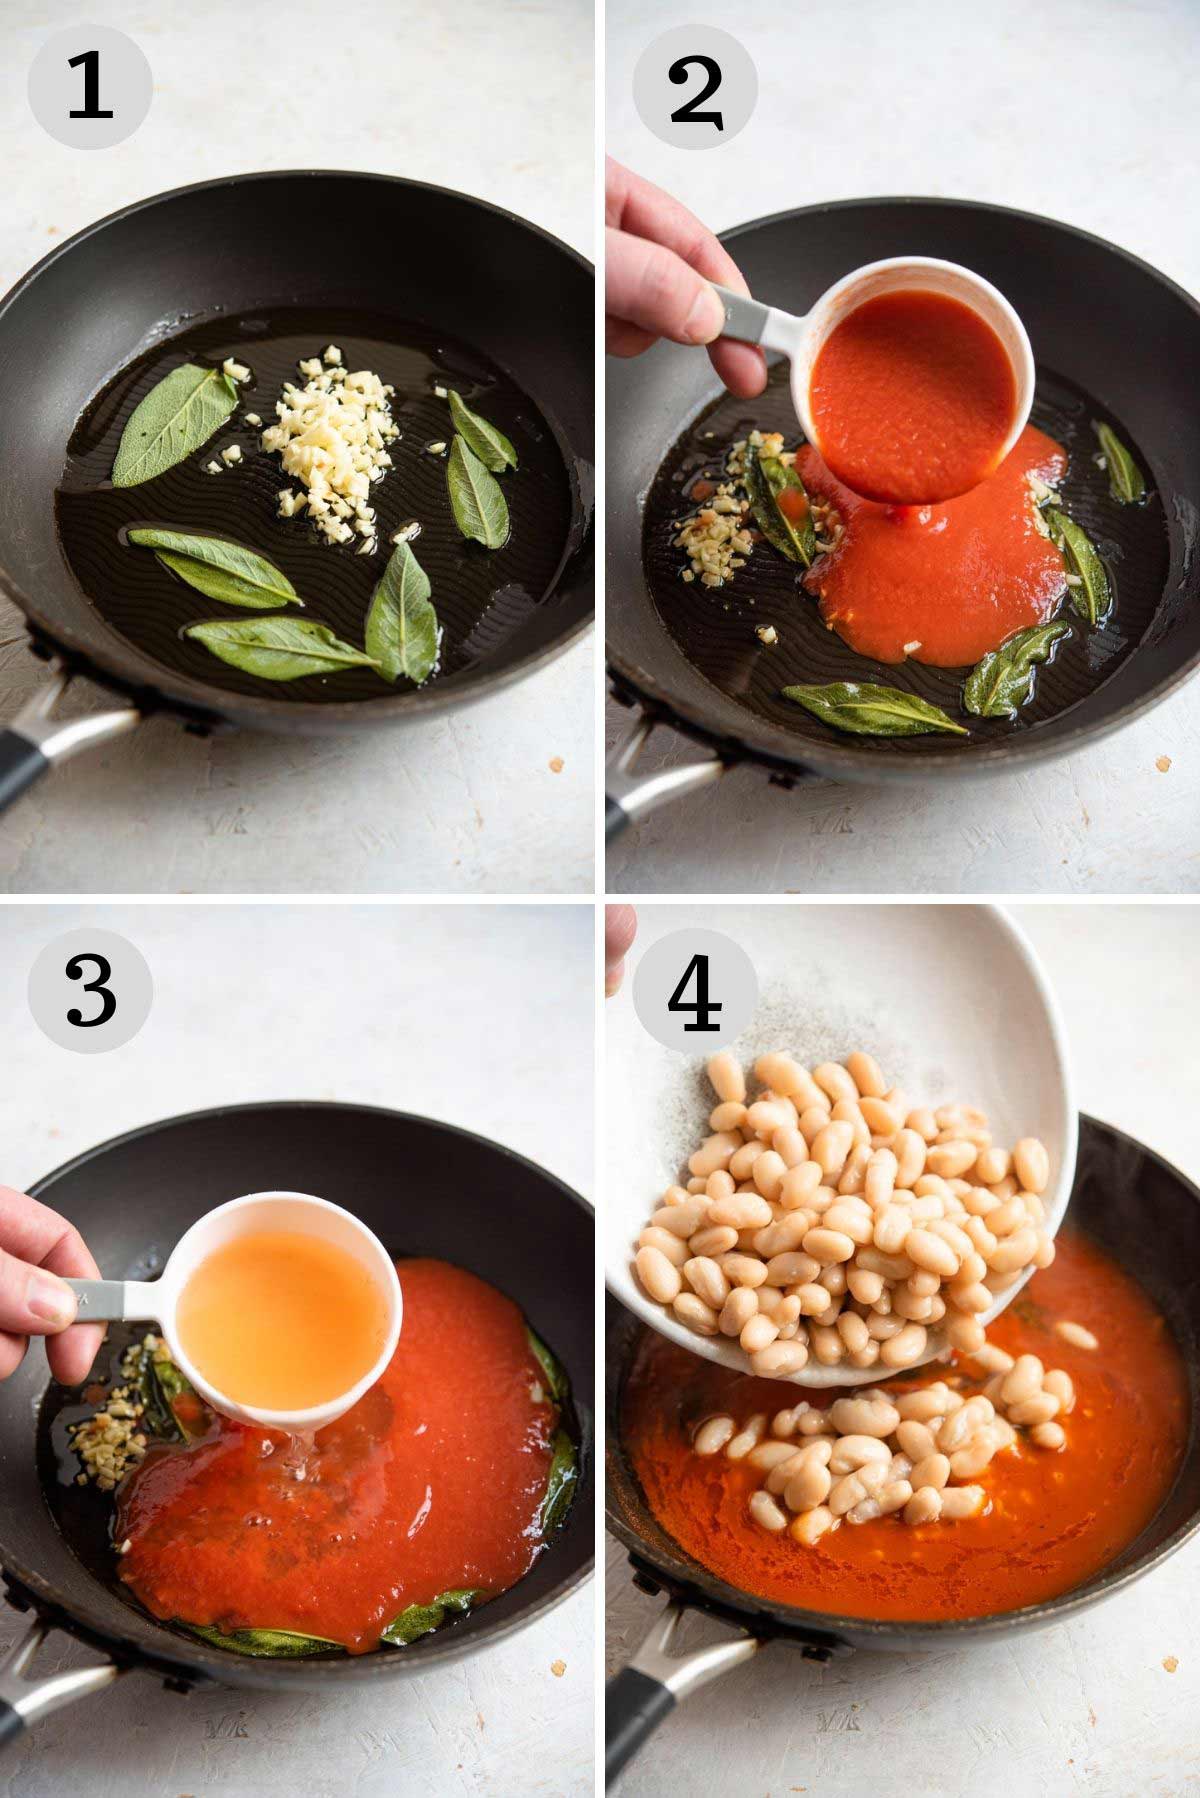 Step by step photos showing how to make fagioli all'uccelletto (beans in tomato sauce)